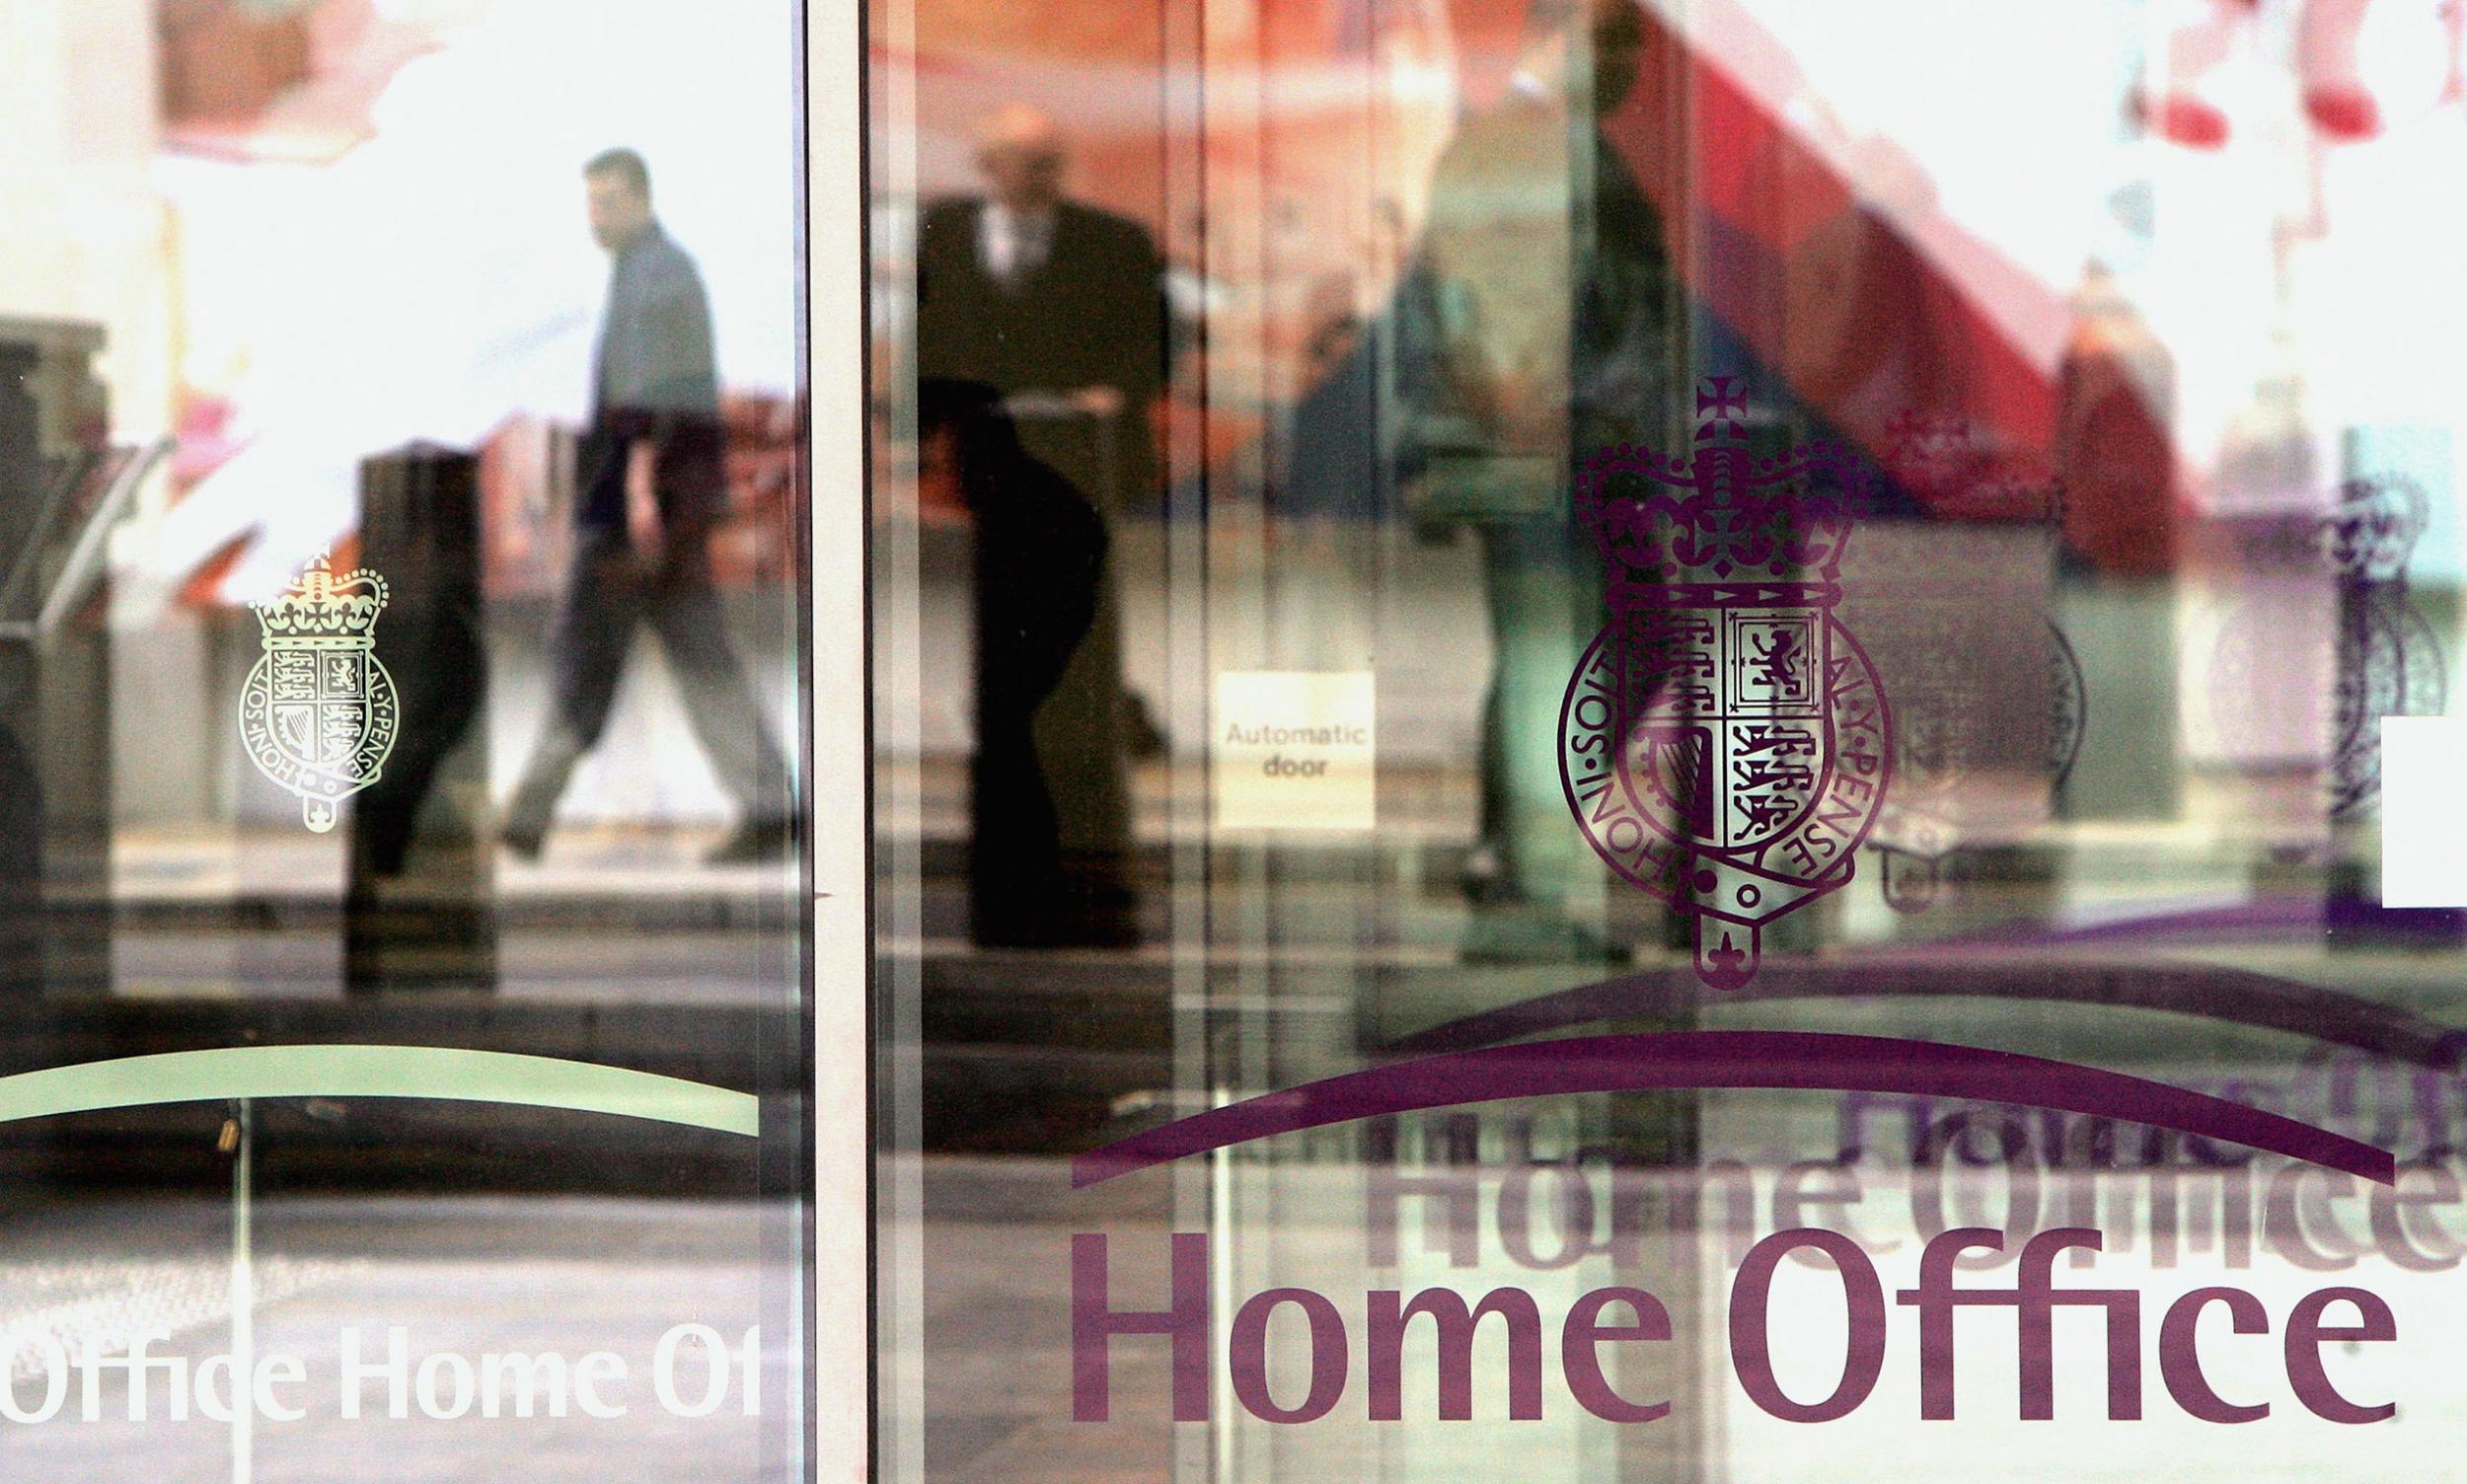 An investigation by the Home Office Anti-Corruption Unit is ongoing